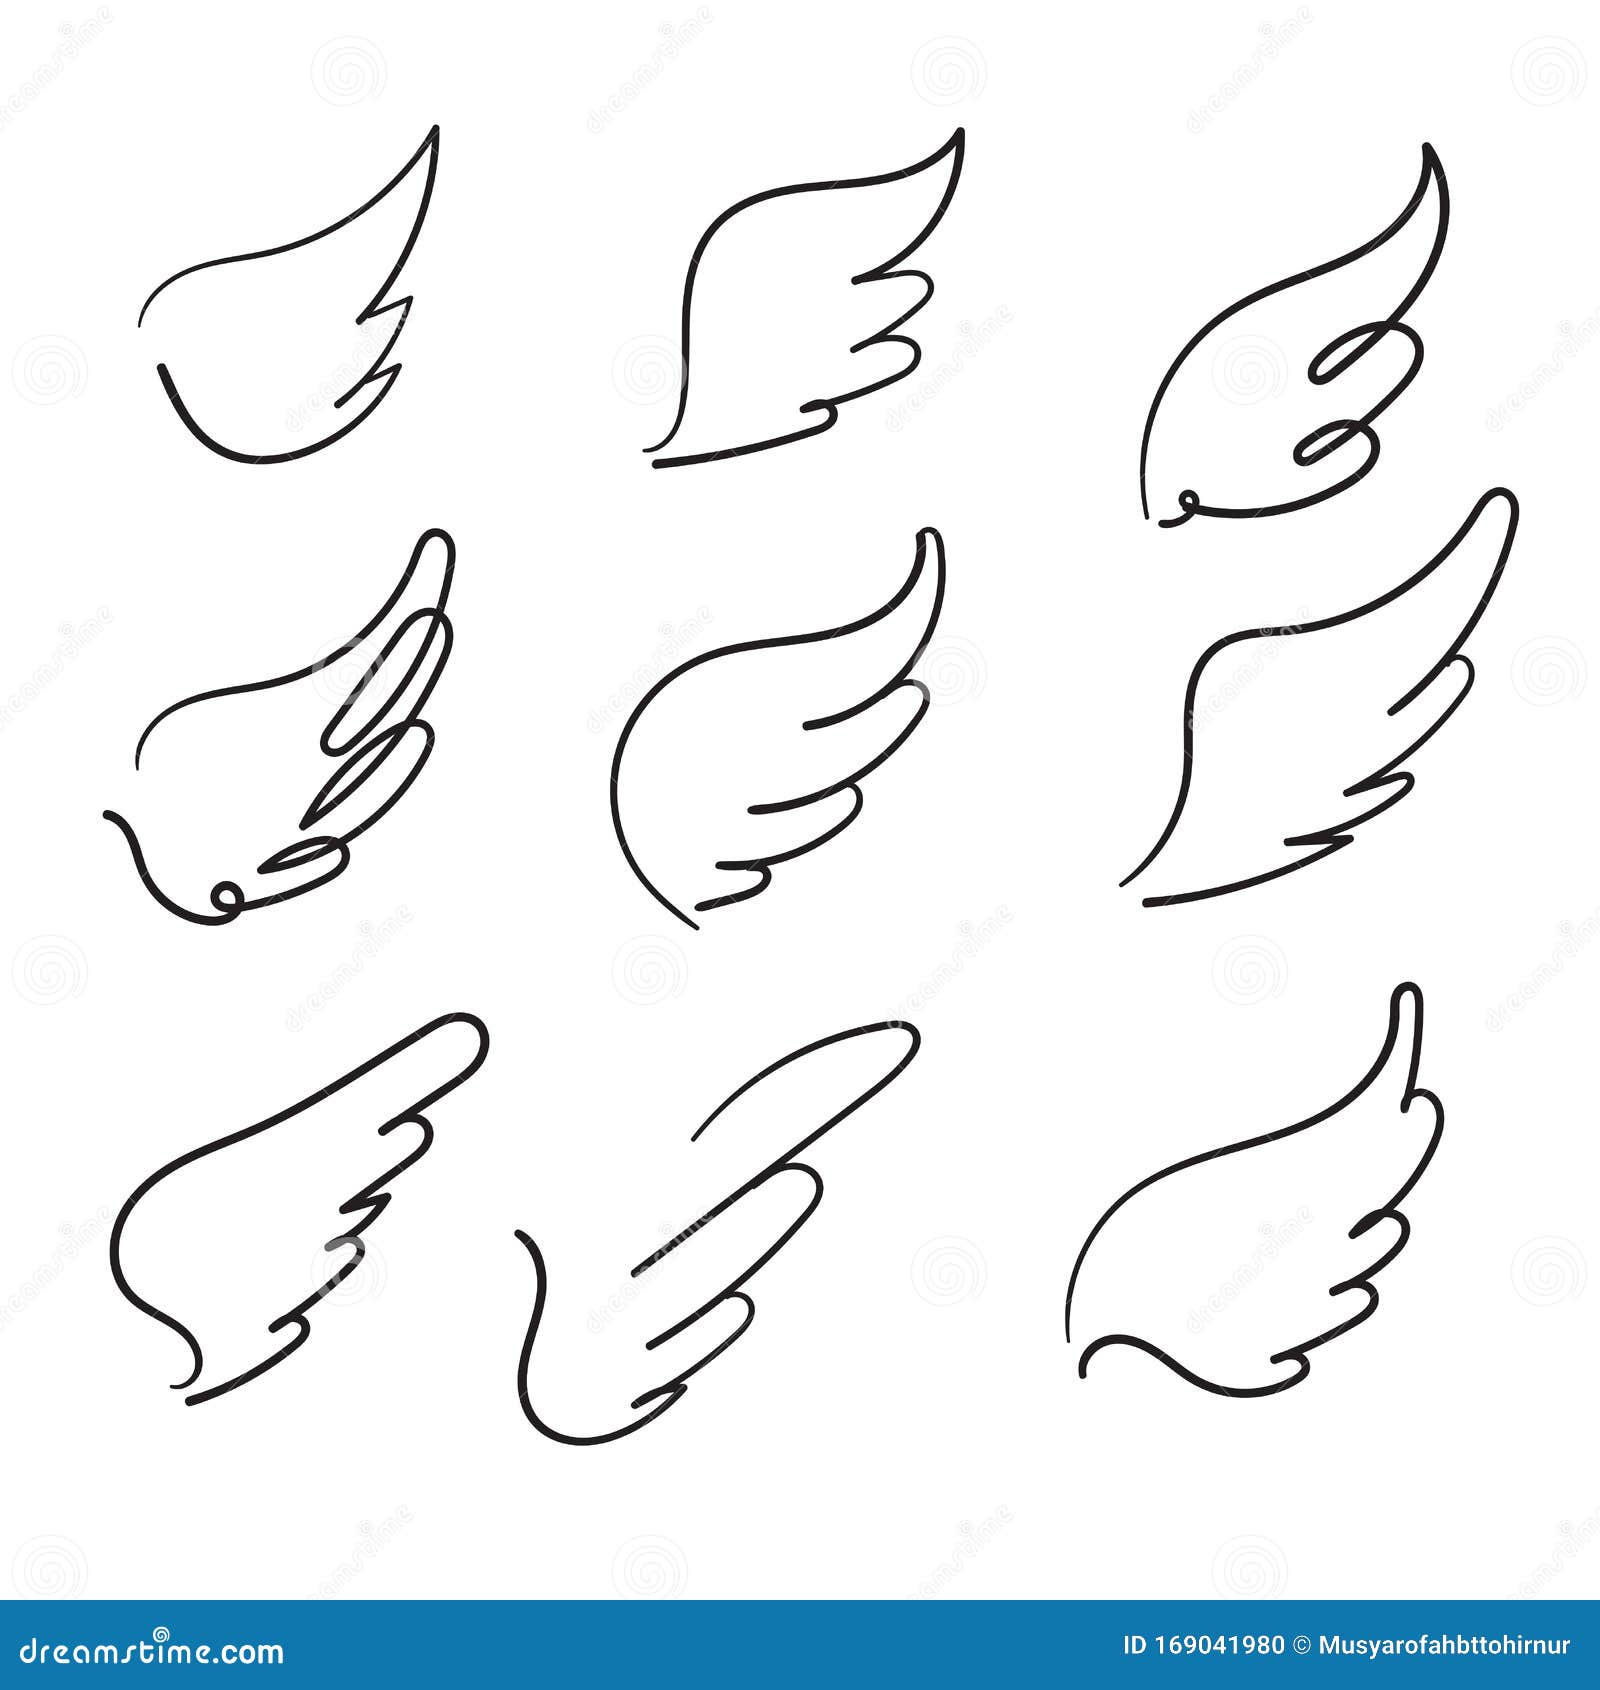 Download Collection Of Sketch Angel Wings. Angel Feather Wing, Bird ...